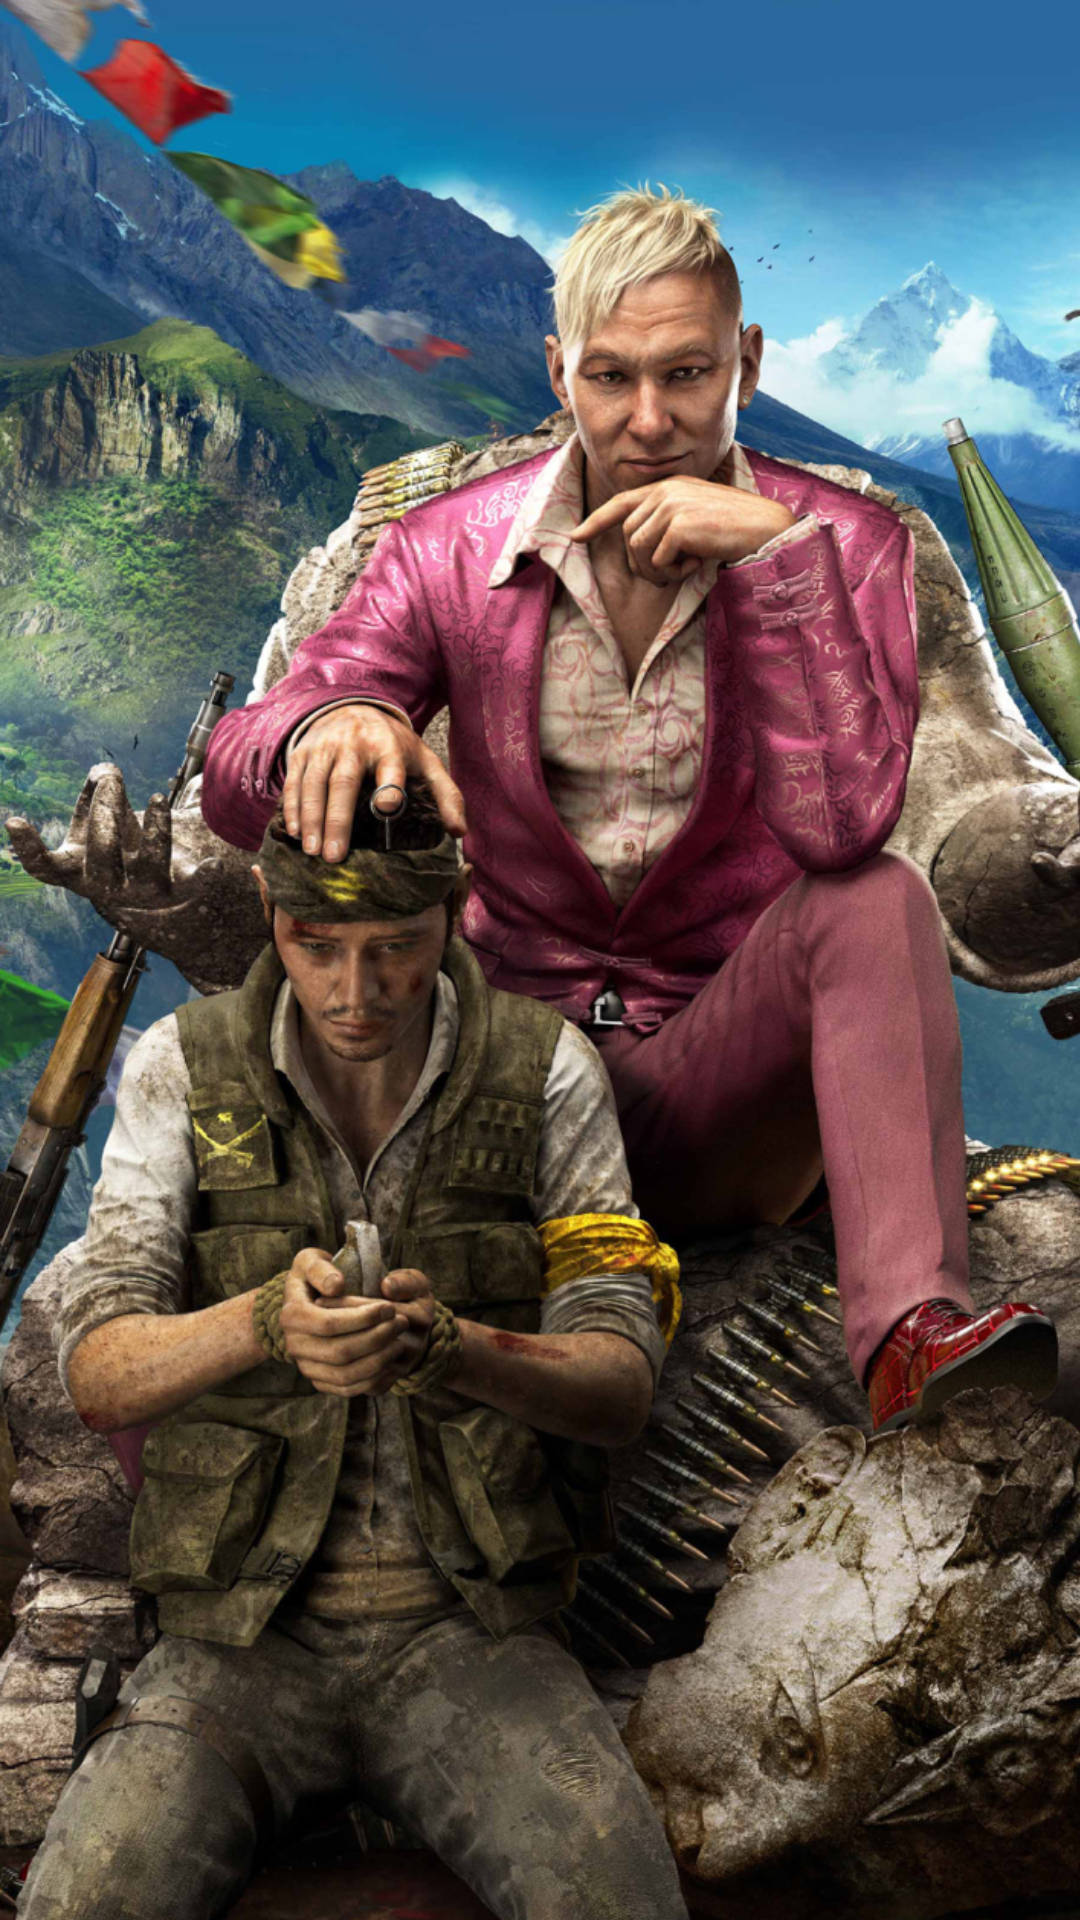 Engrossing Far Cry 4 Game Poster designed for Mobile Display Wallpaper